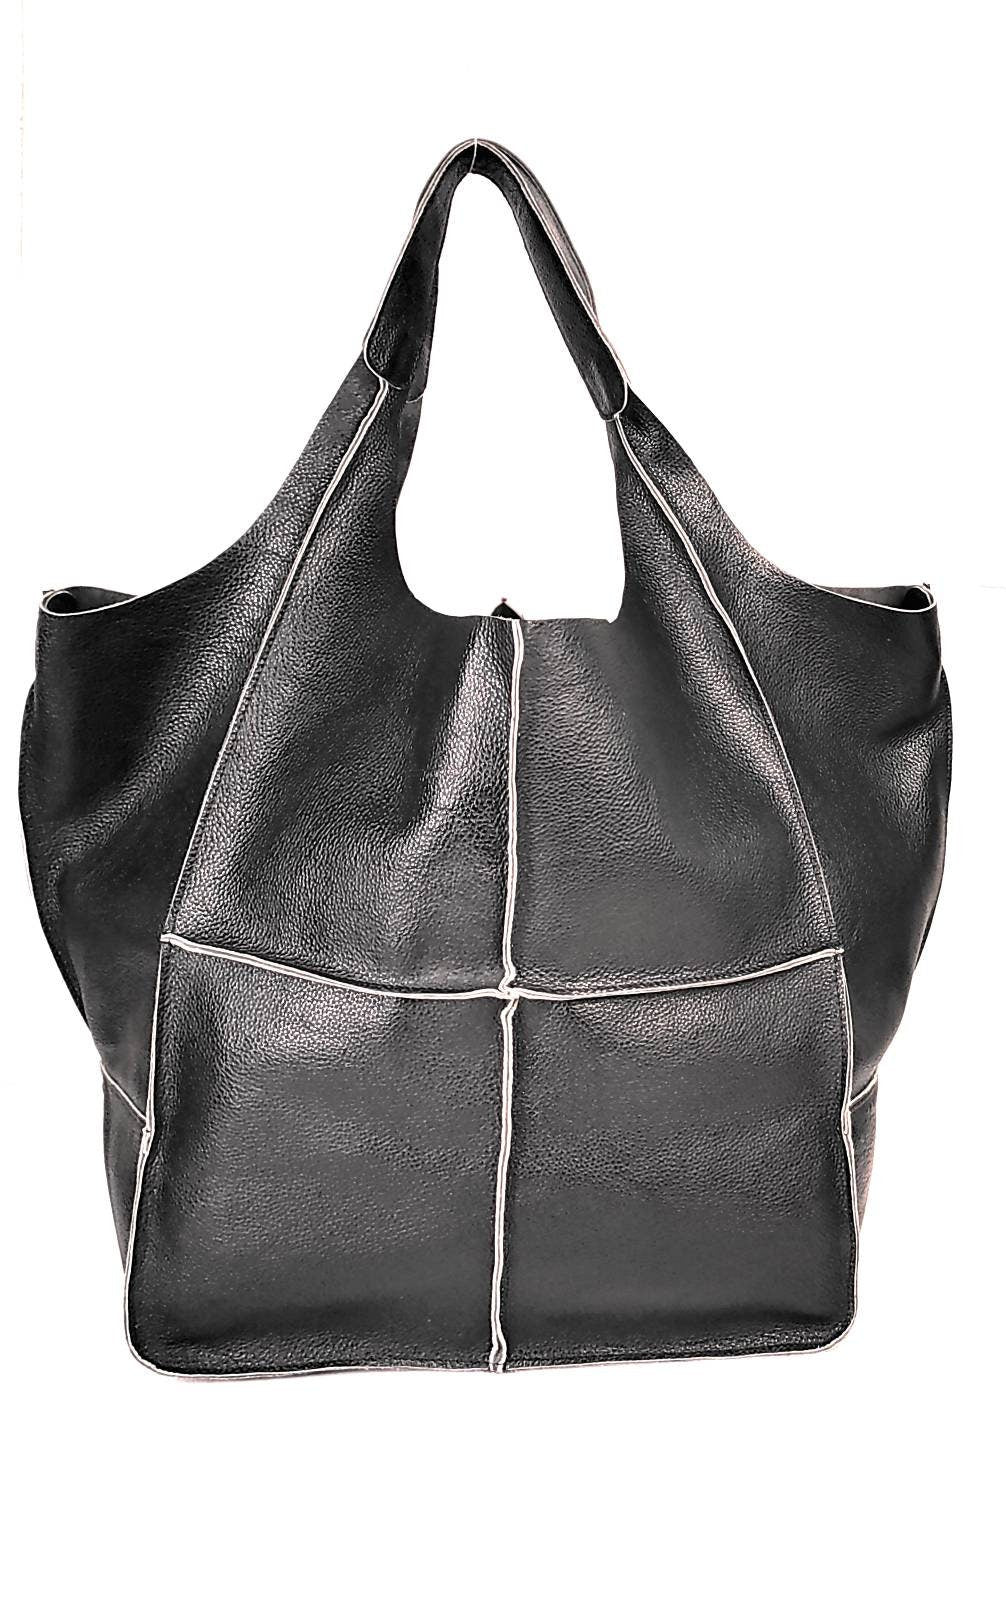 Grey Leather Hobo Bag - Slouchy Leather Purse For Women | Laroll Bags